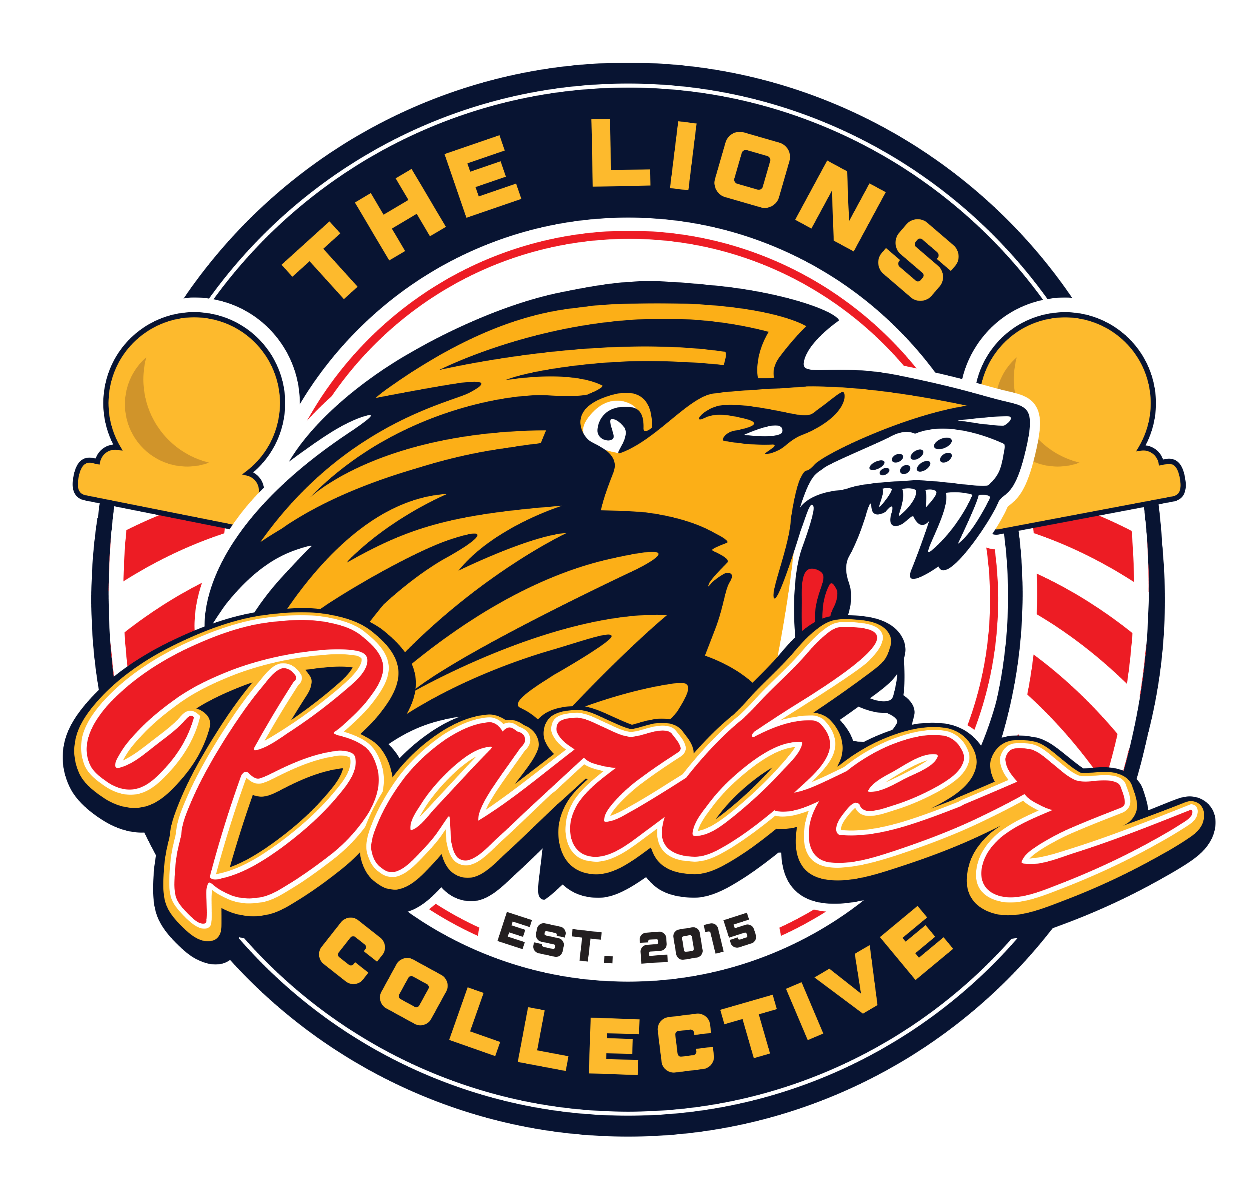 Lion Barbers Collective - First ever non-profit Barbershop in London